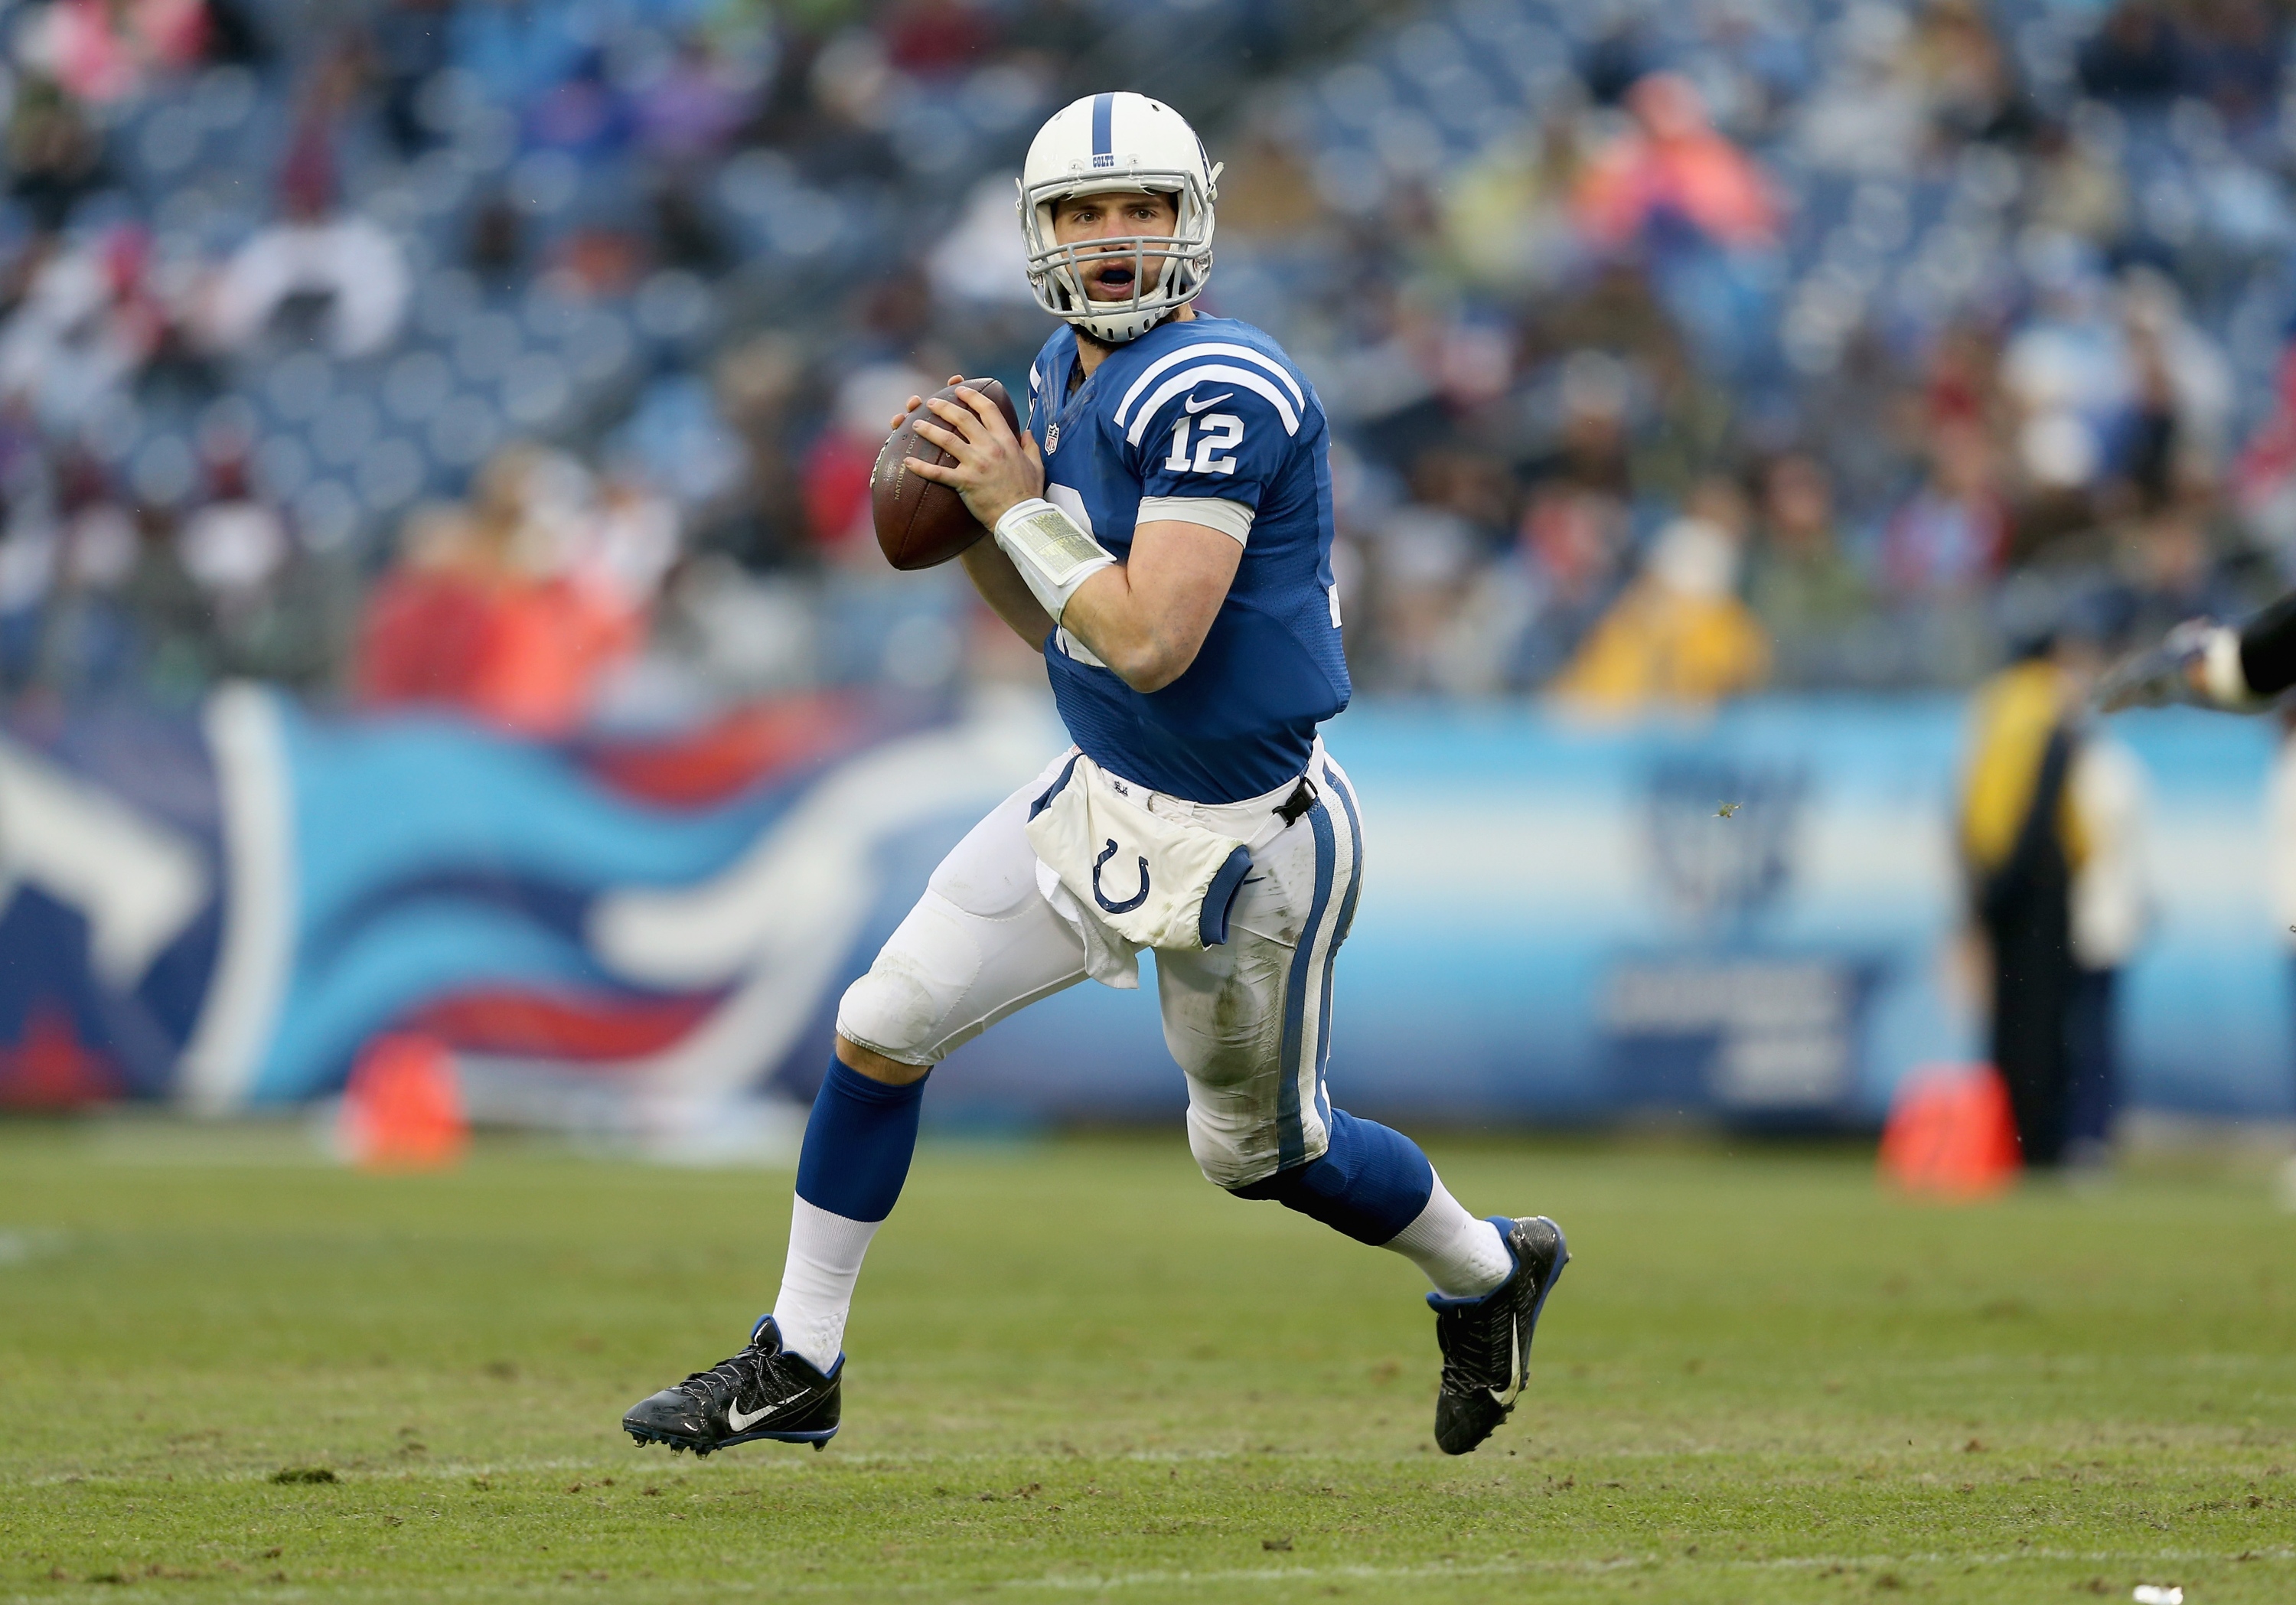 NASHVILLE, TN - DECEMBER 28: Andrew Luck #12 of the Indianapolis Colts looks to throw a pass during the game against the Tennessee Titans at LP Field on December 28, 2014 in Nashville, Tennessee. (Photo by Andy Lyons/Getty Images)